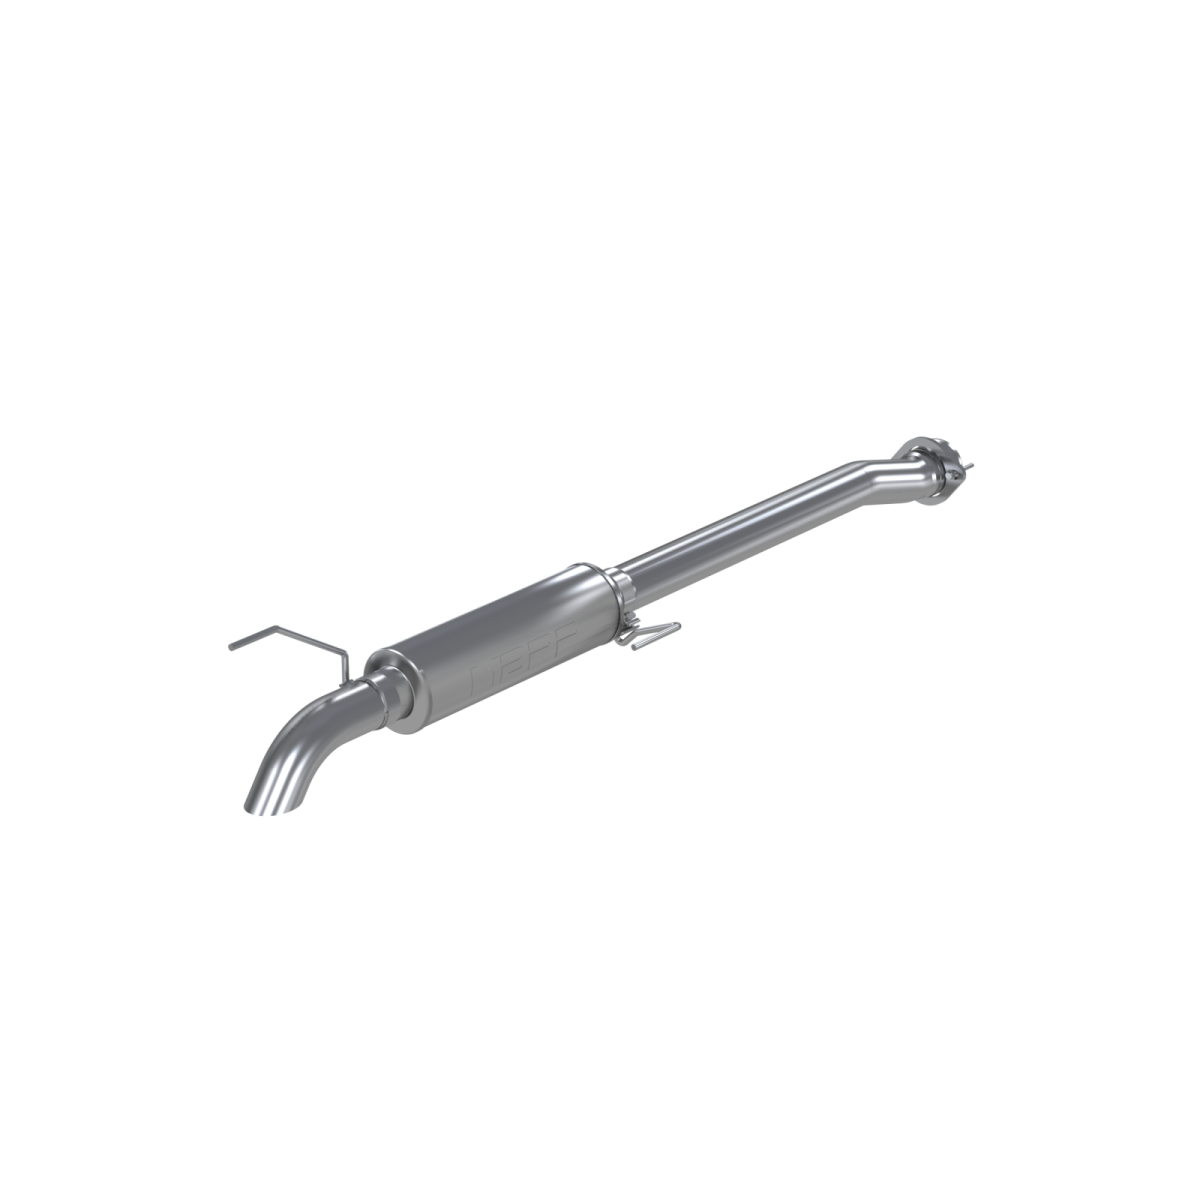 MBRP - MBRP 3 1/2 Inch Cat Back Exhaust System Single Turn Down For 11-14 Ford F-150 Raptor 6.2L Crew Cab/Short Bed Extended Cab Short Bed Aluminized Steel S5242AL